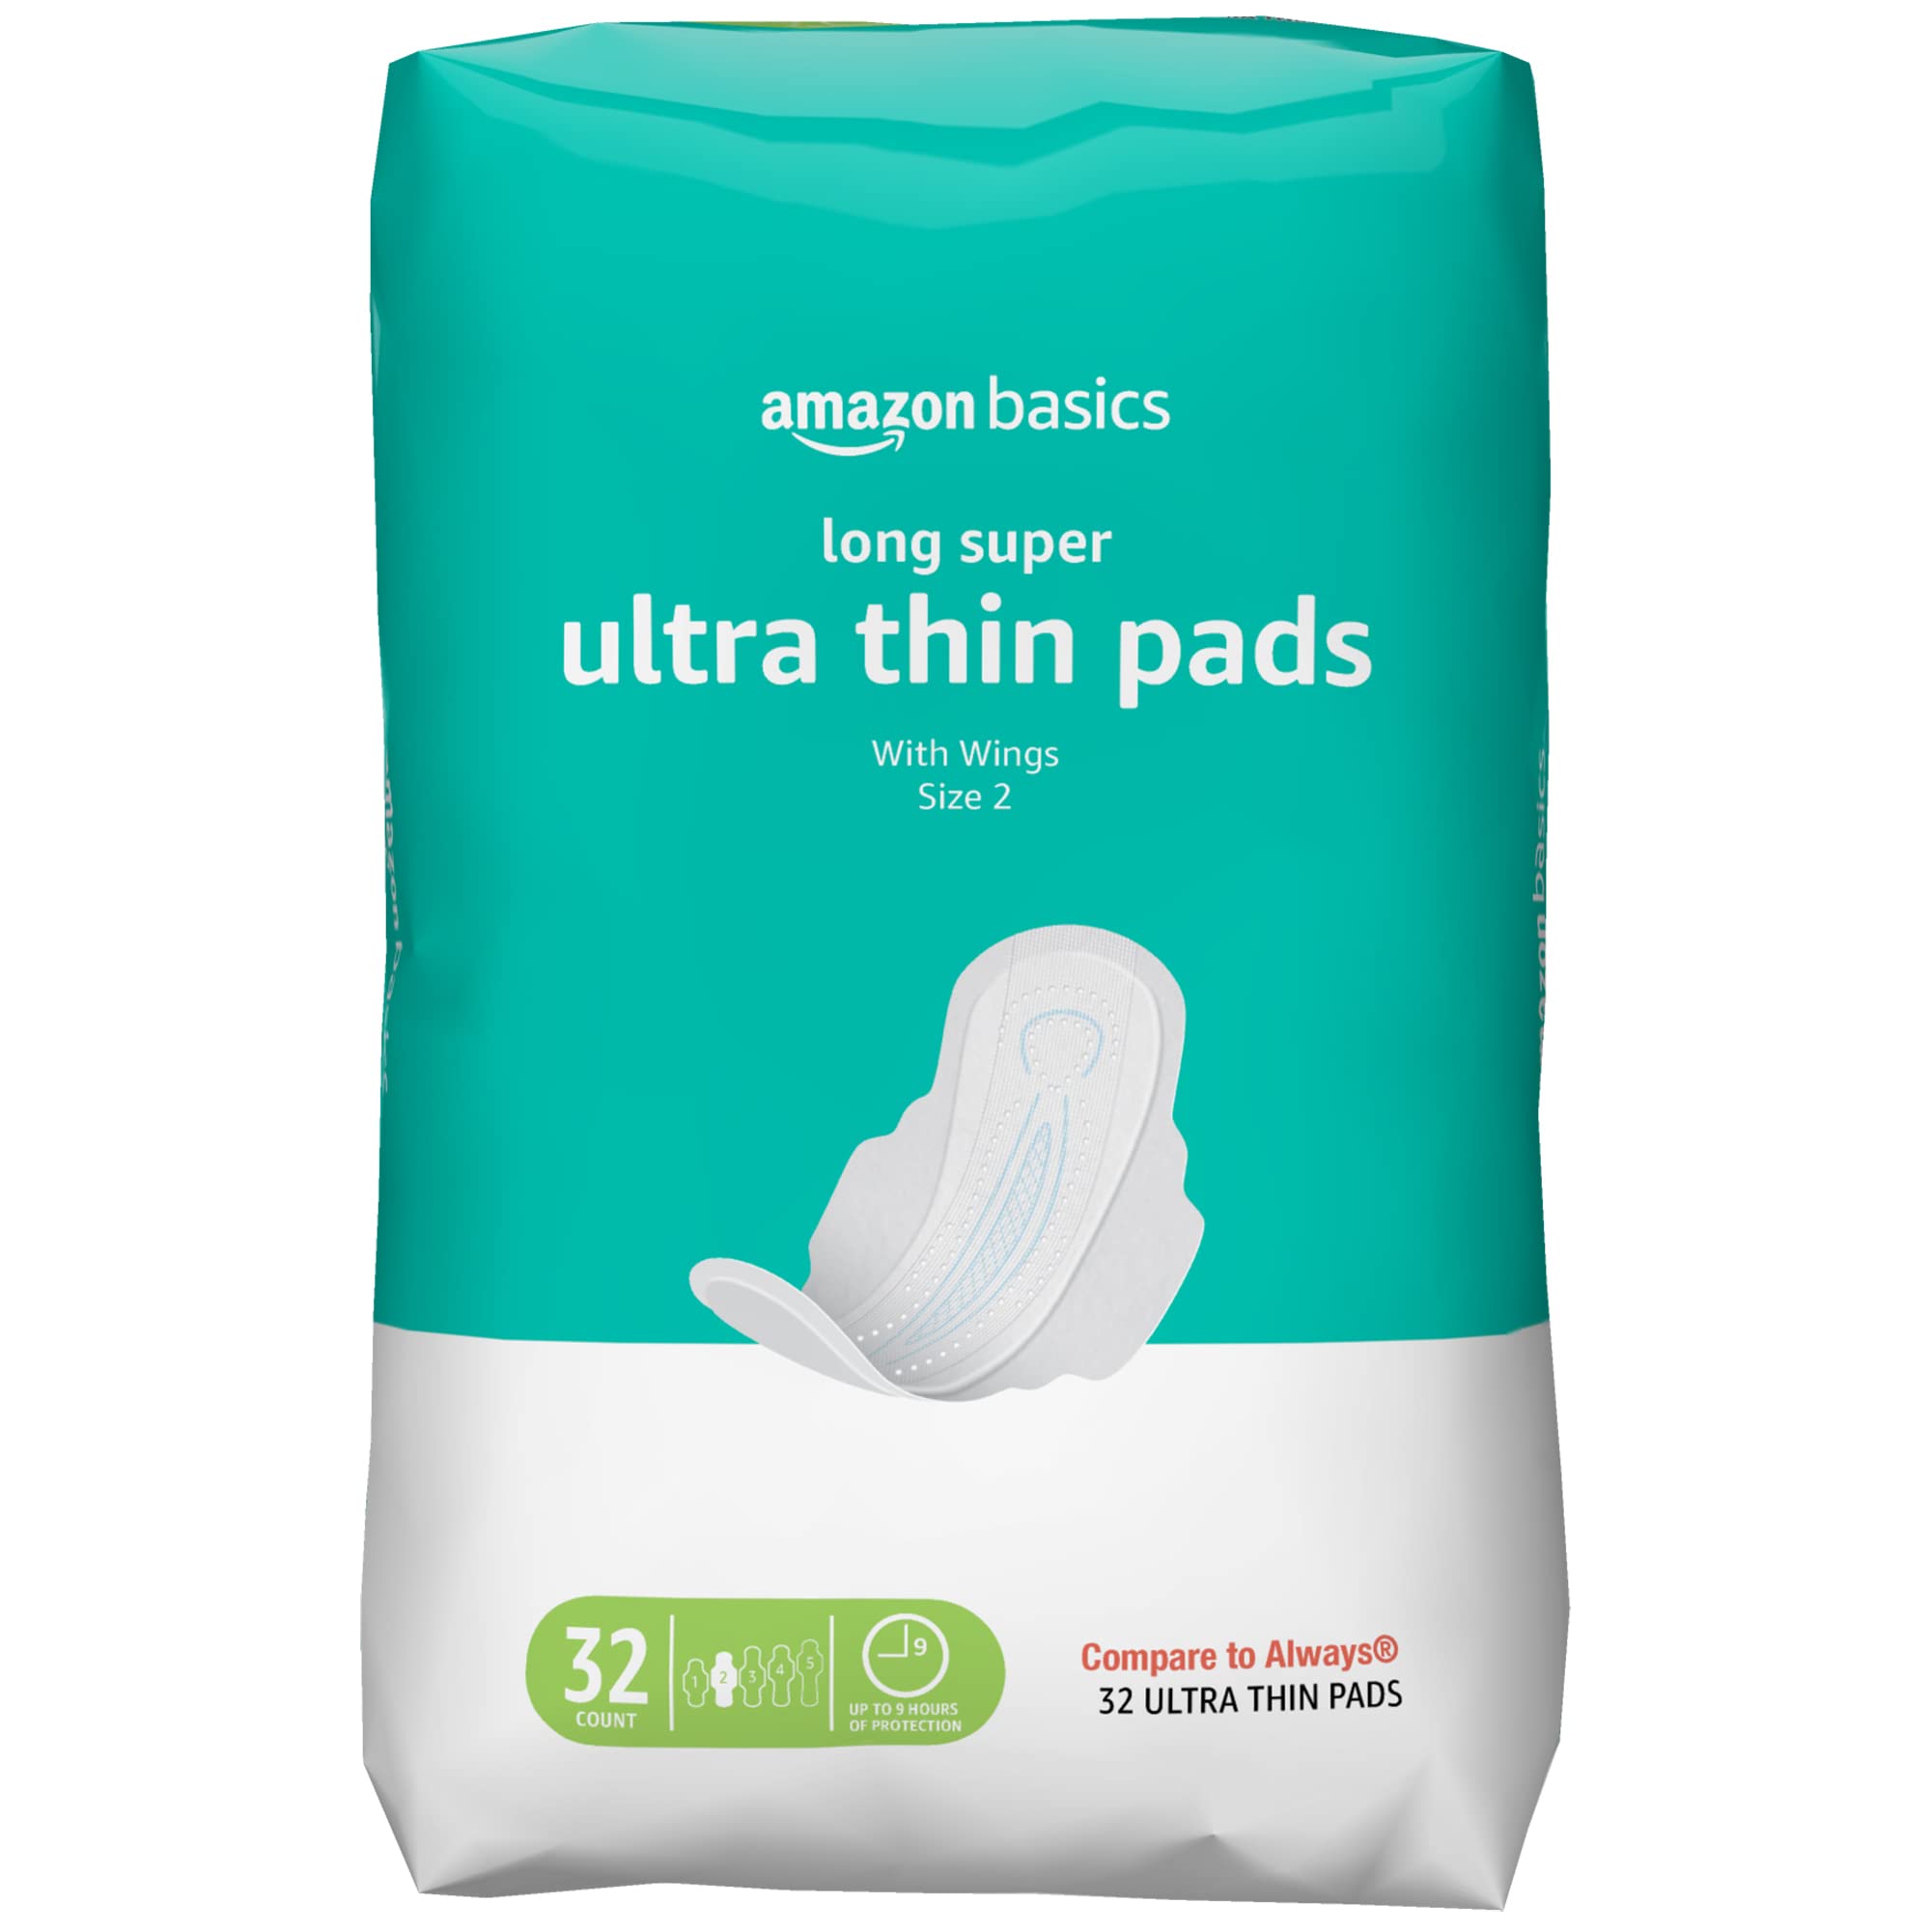 Amazon Basics Ultra Thin Pads with Flexi-Wings for Periods, Long Length, Super Absorbency, Unscented, Size 2, 32 Count, 1 Pack (Previously Solimo)